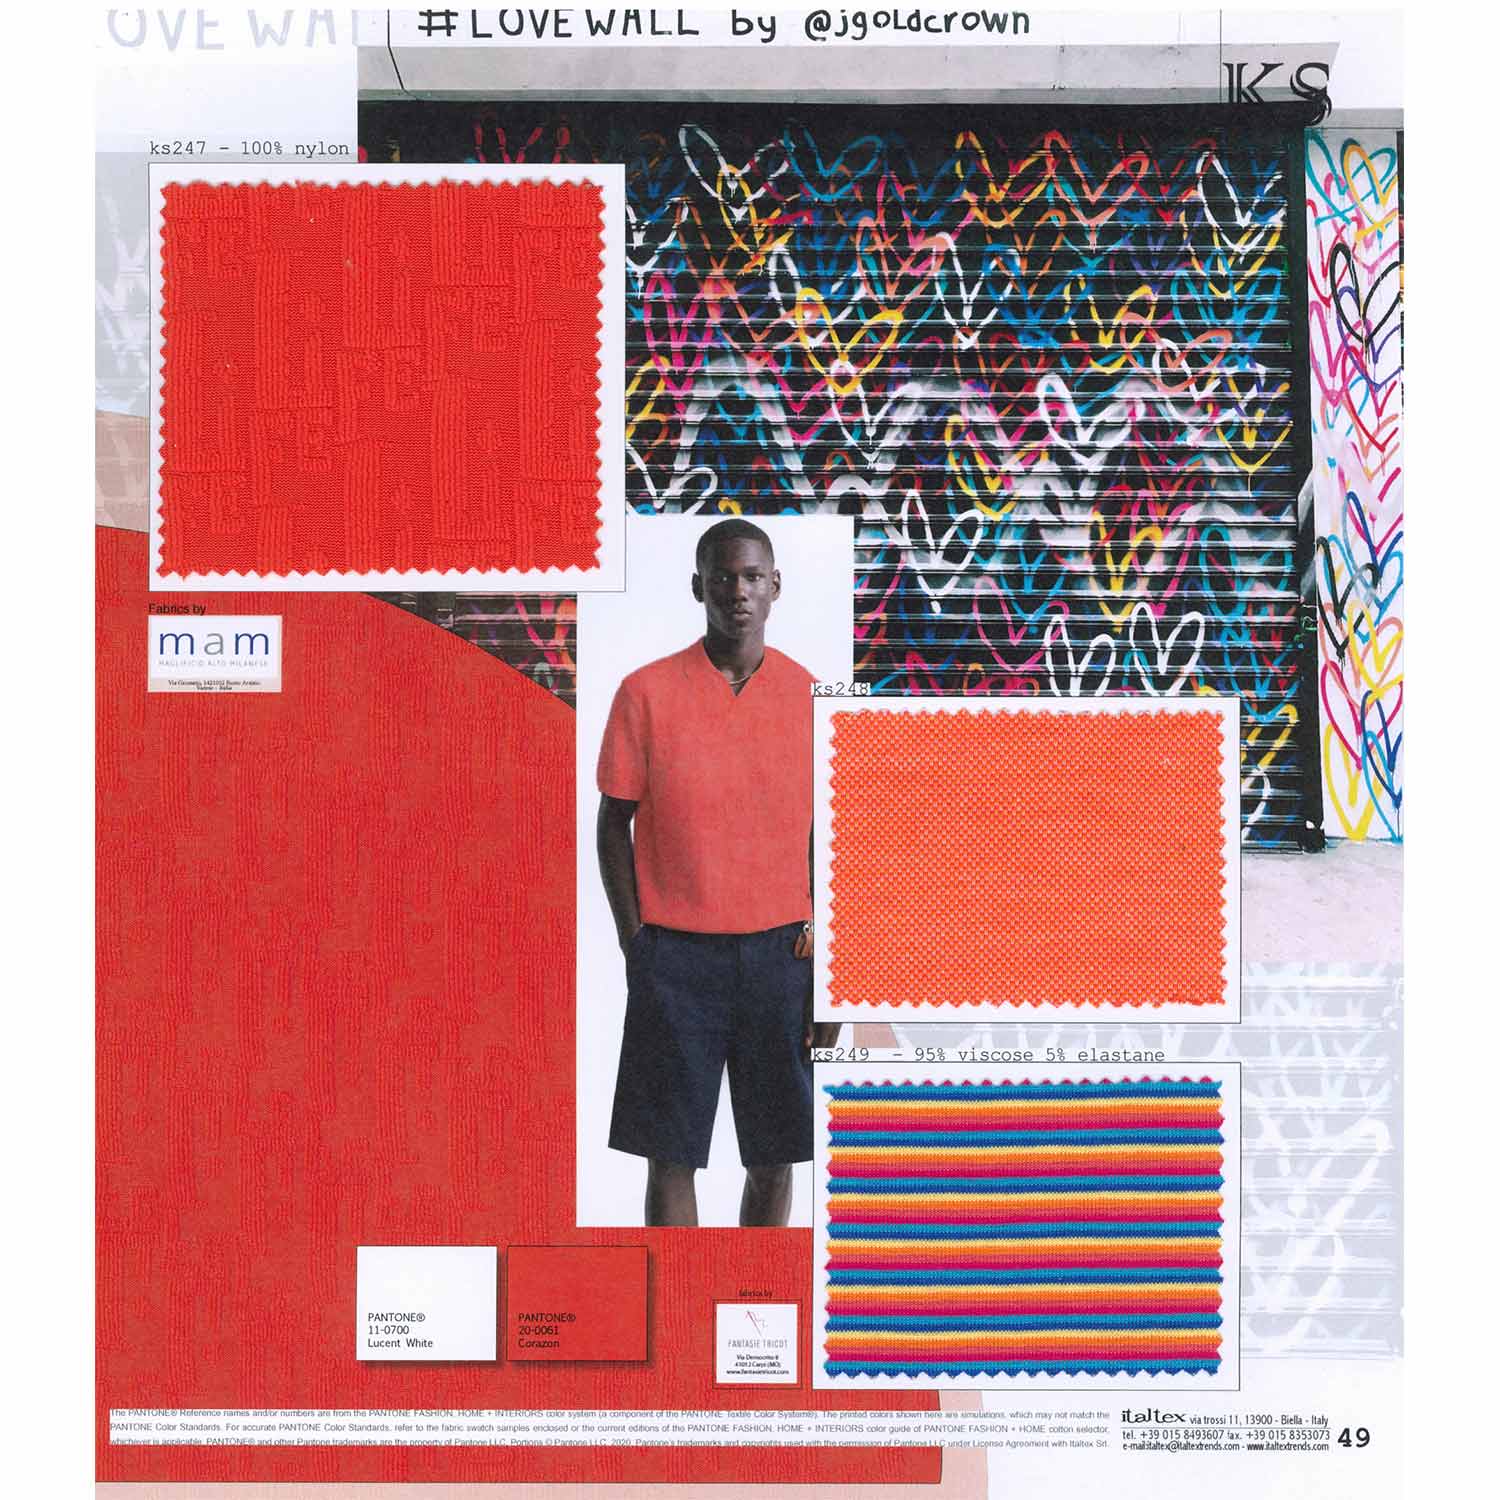 Three knit fabrics for men's t-shirts and polo shirts. One bright red jacquard knit where words play with textures. An orange pique. A viscose/elastane striped knit in gradient stripes shading from red to yellow and from blue to light blue